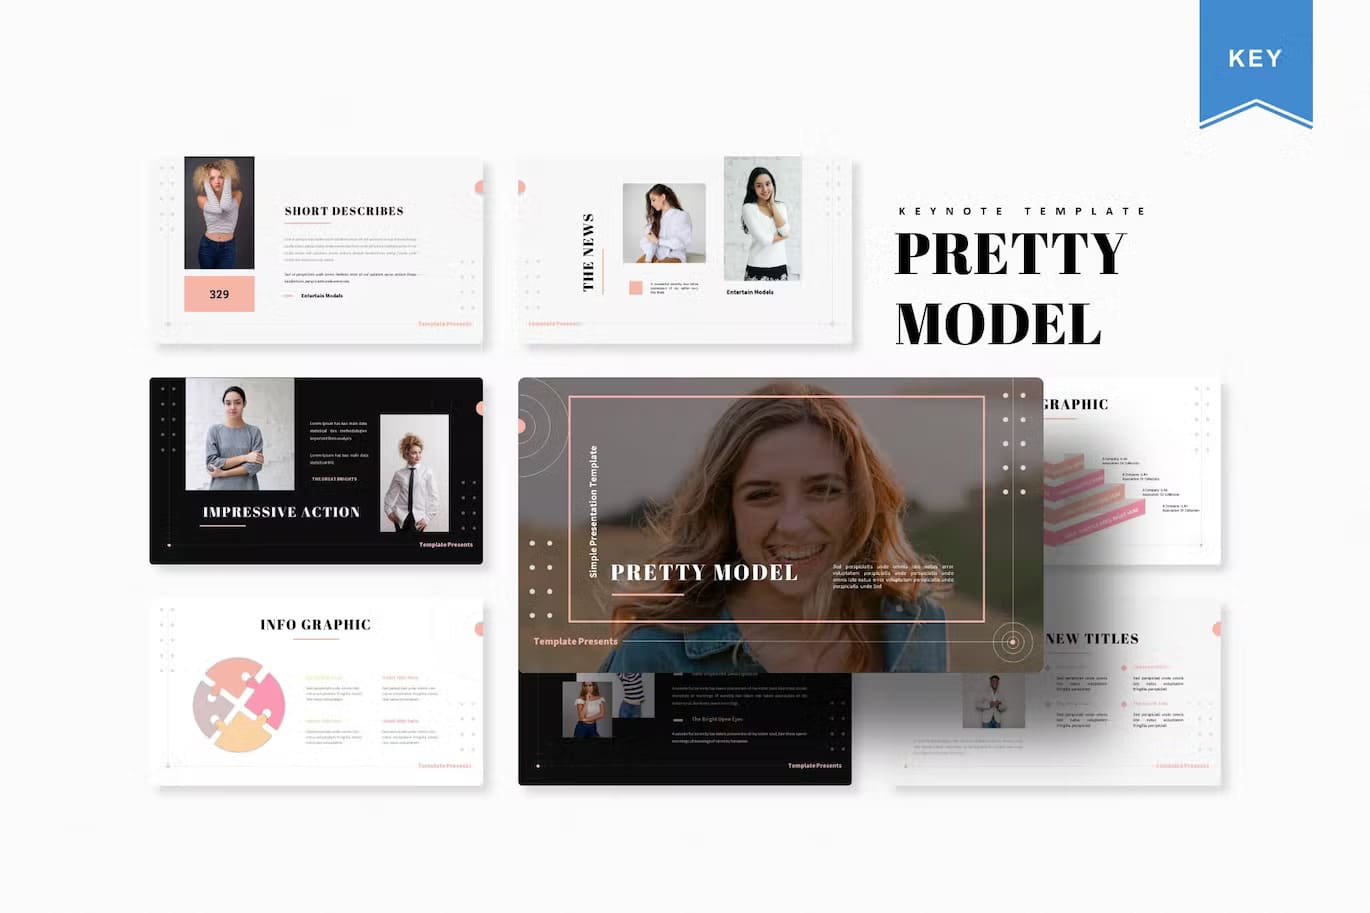 New titles of the Pretty Model | Keynote Template.